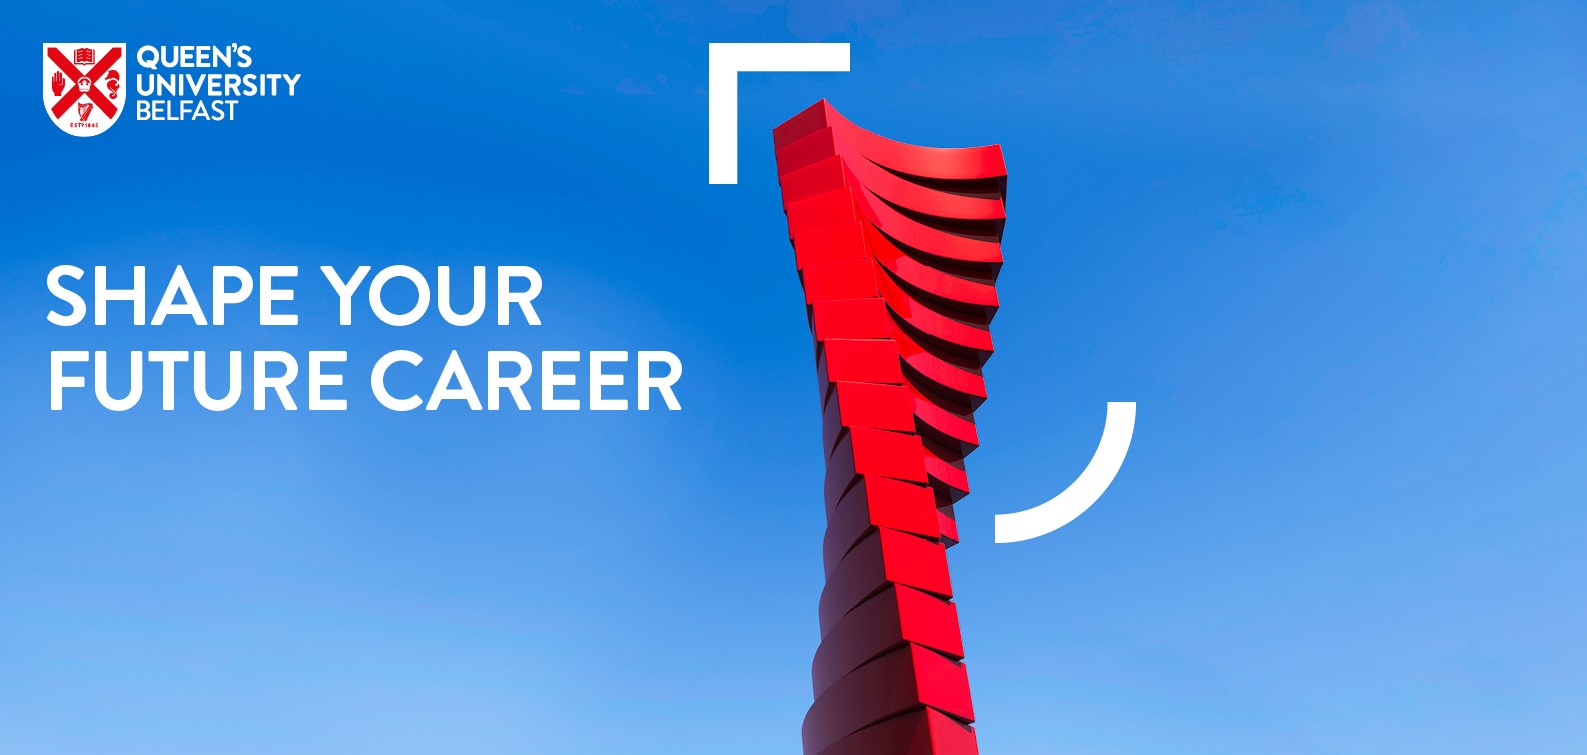 Wording - Shape your future career - on blue sky background, with image of twisting red shape and University crest